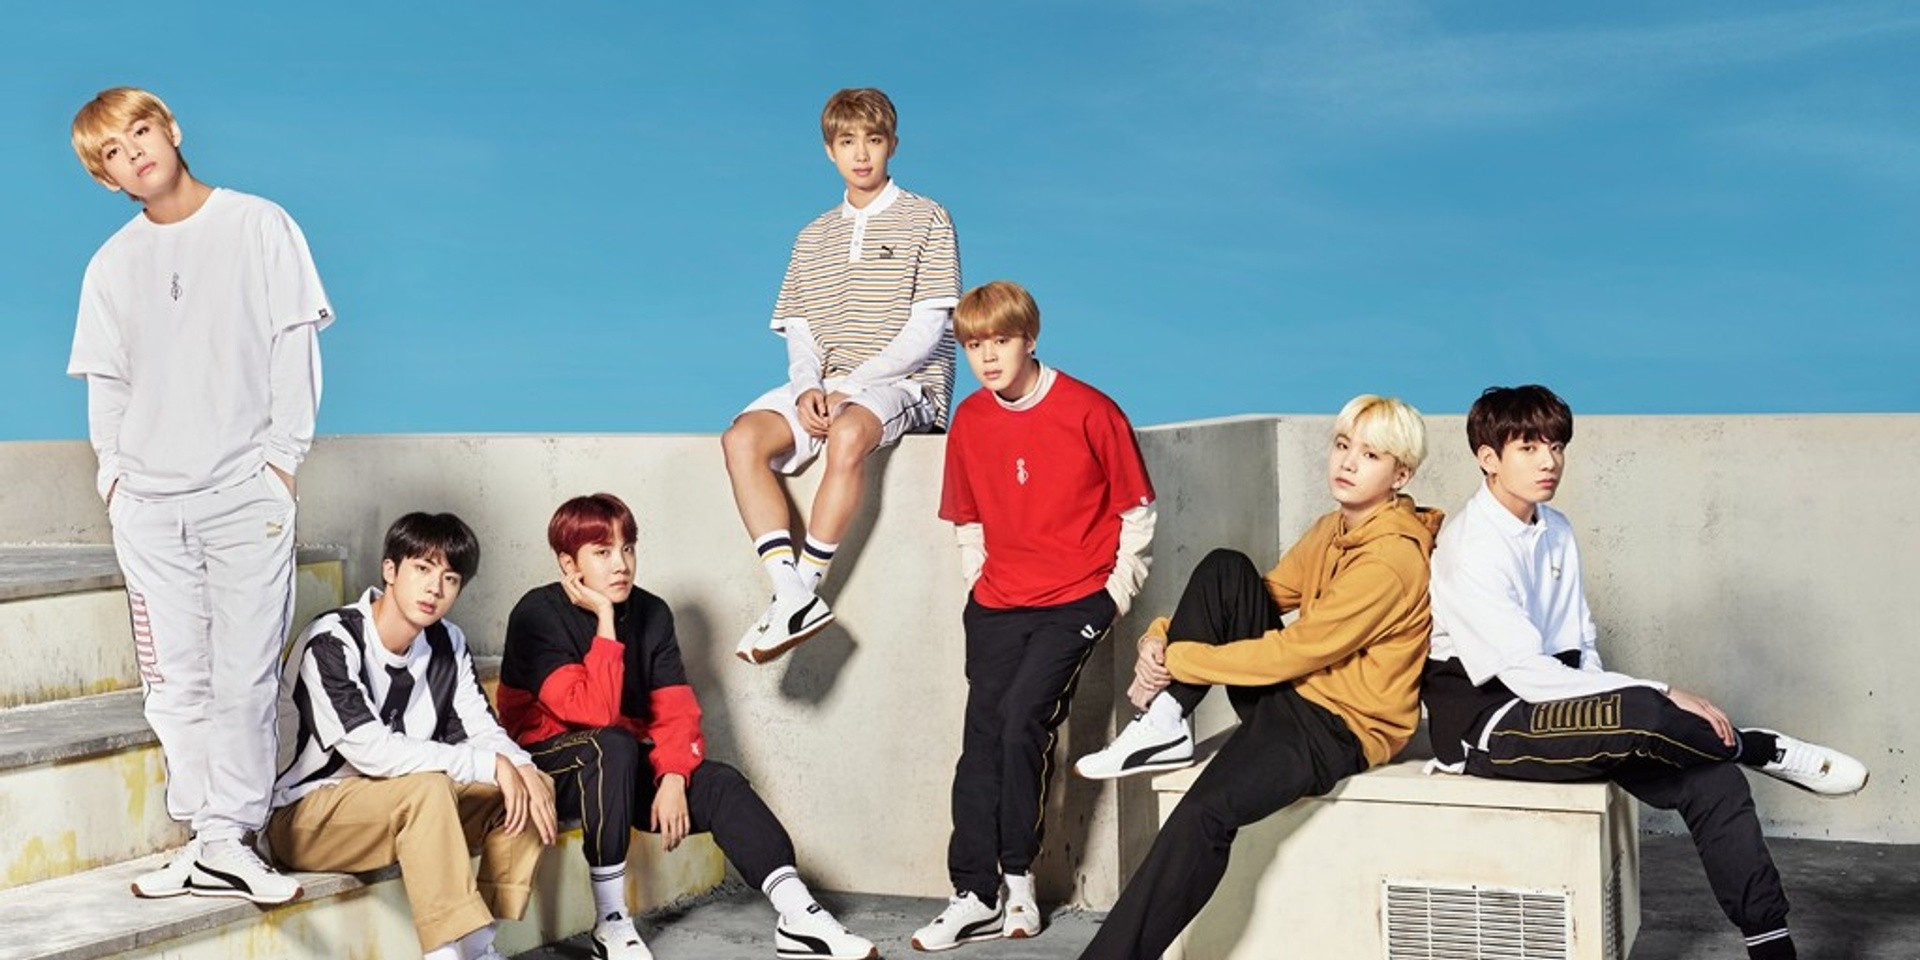 PUMAxBTS fashion collection to launch in Singapore and the Philippines